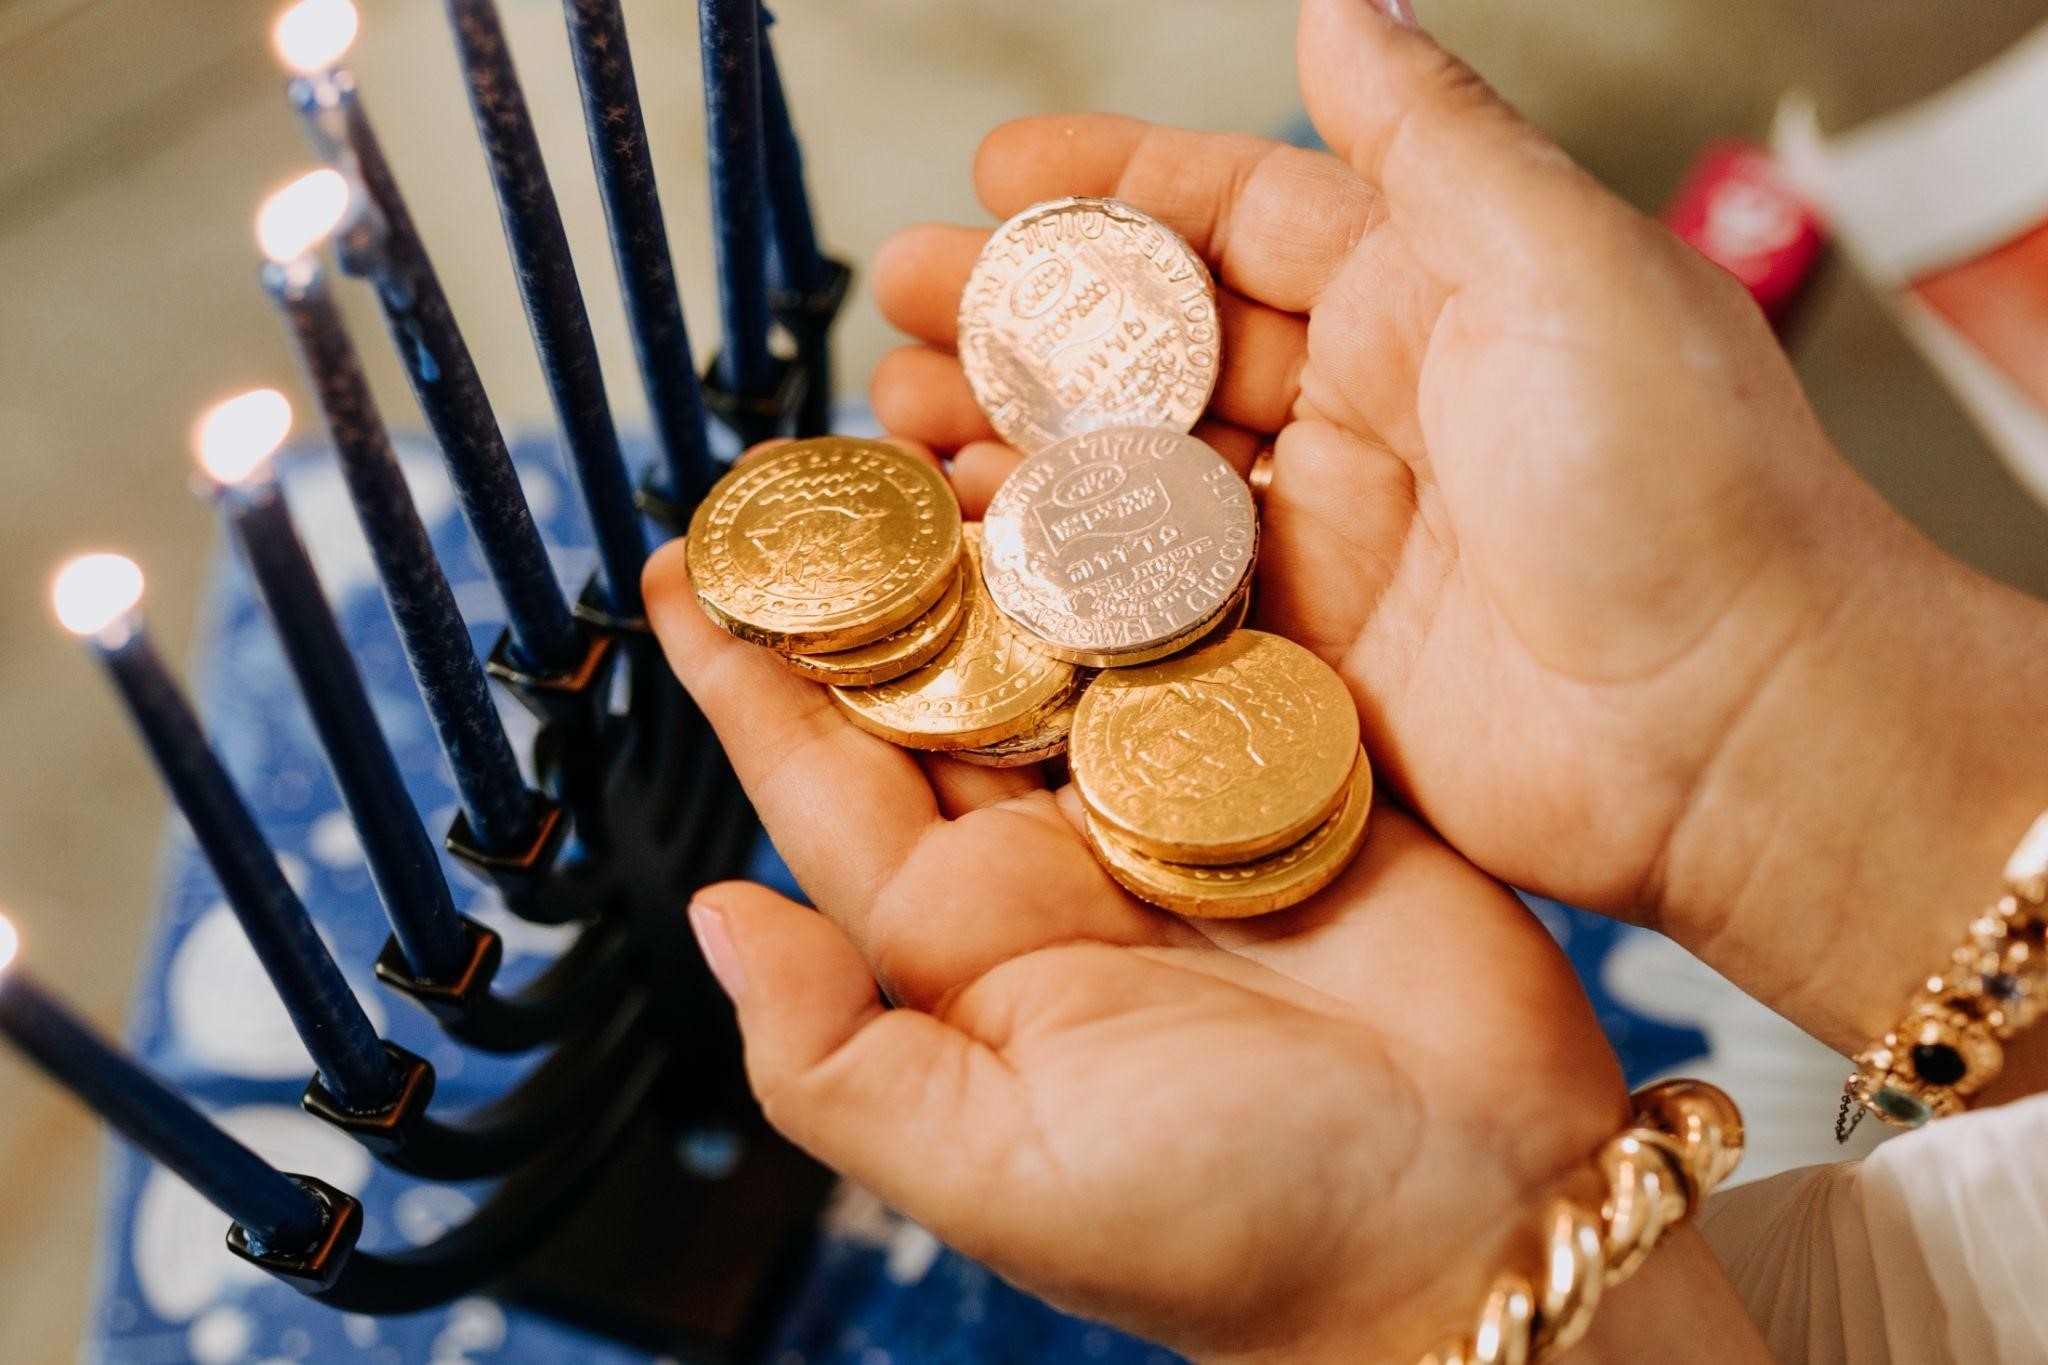 menorah and chocolate coins for chanukah party